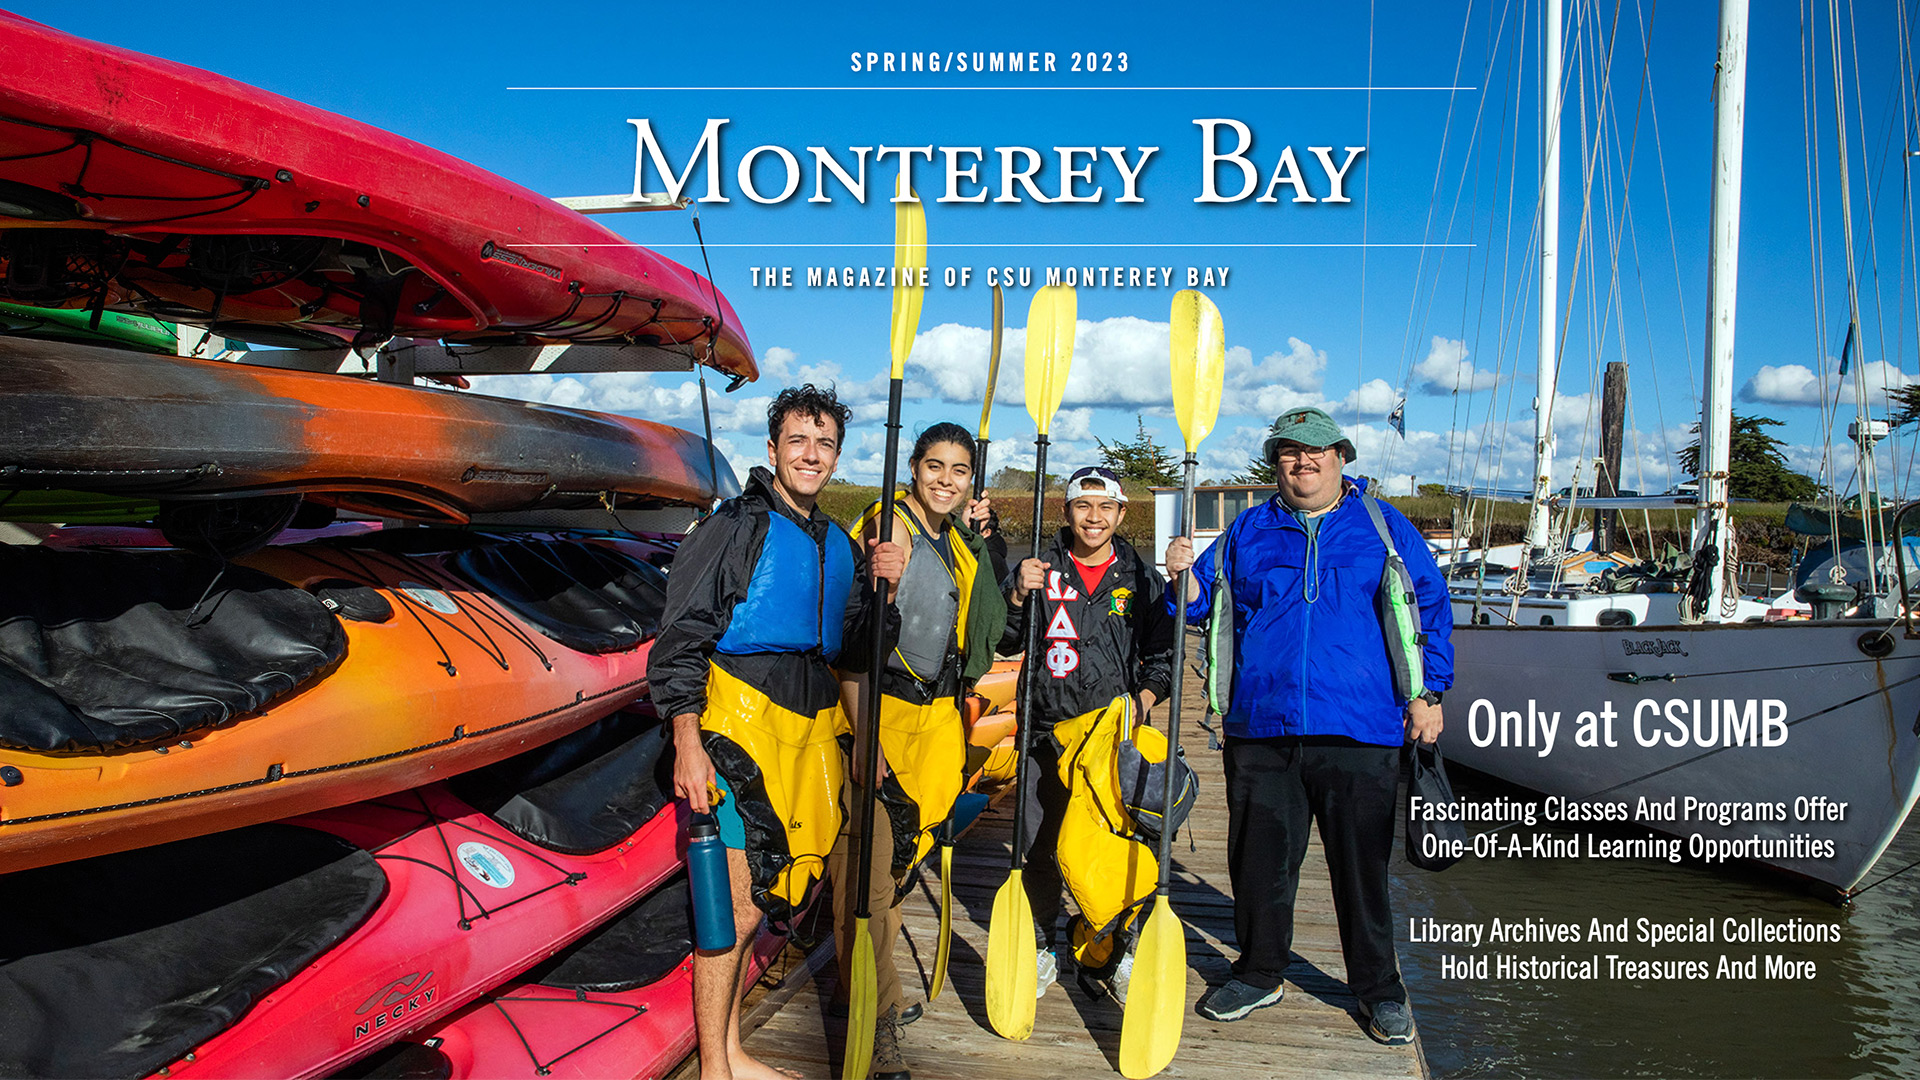 CSUMB Magazine Cover for Spring/Summer 2023 showing image of CSUMB students kayaking at Elkhorn Slough.